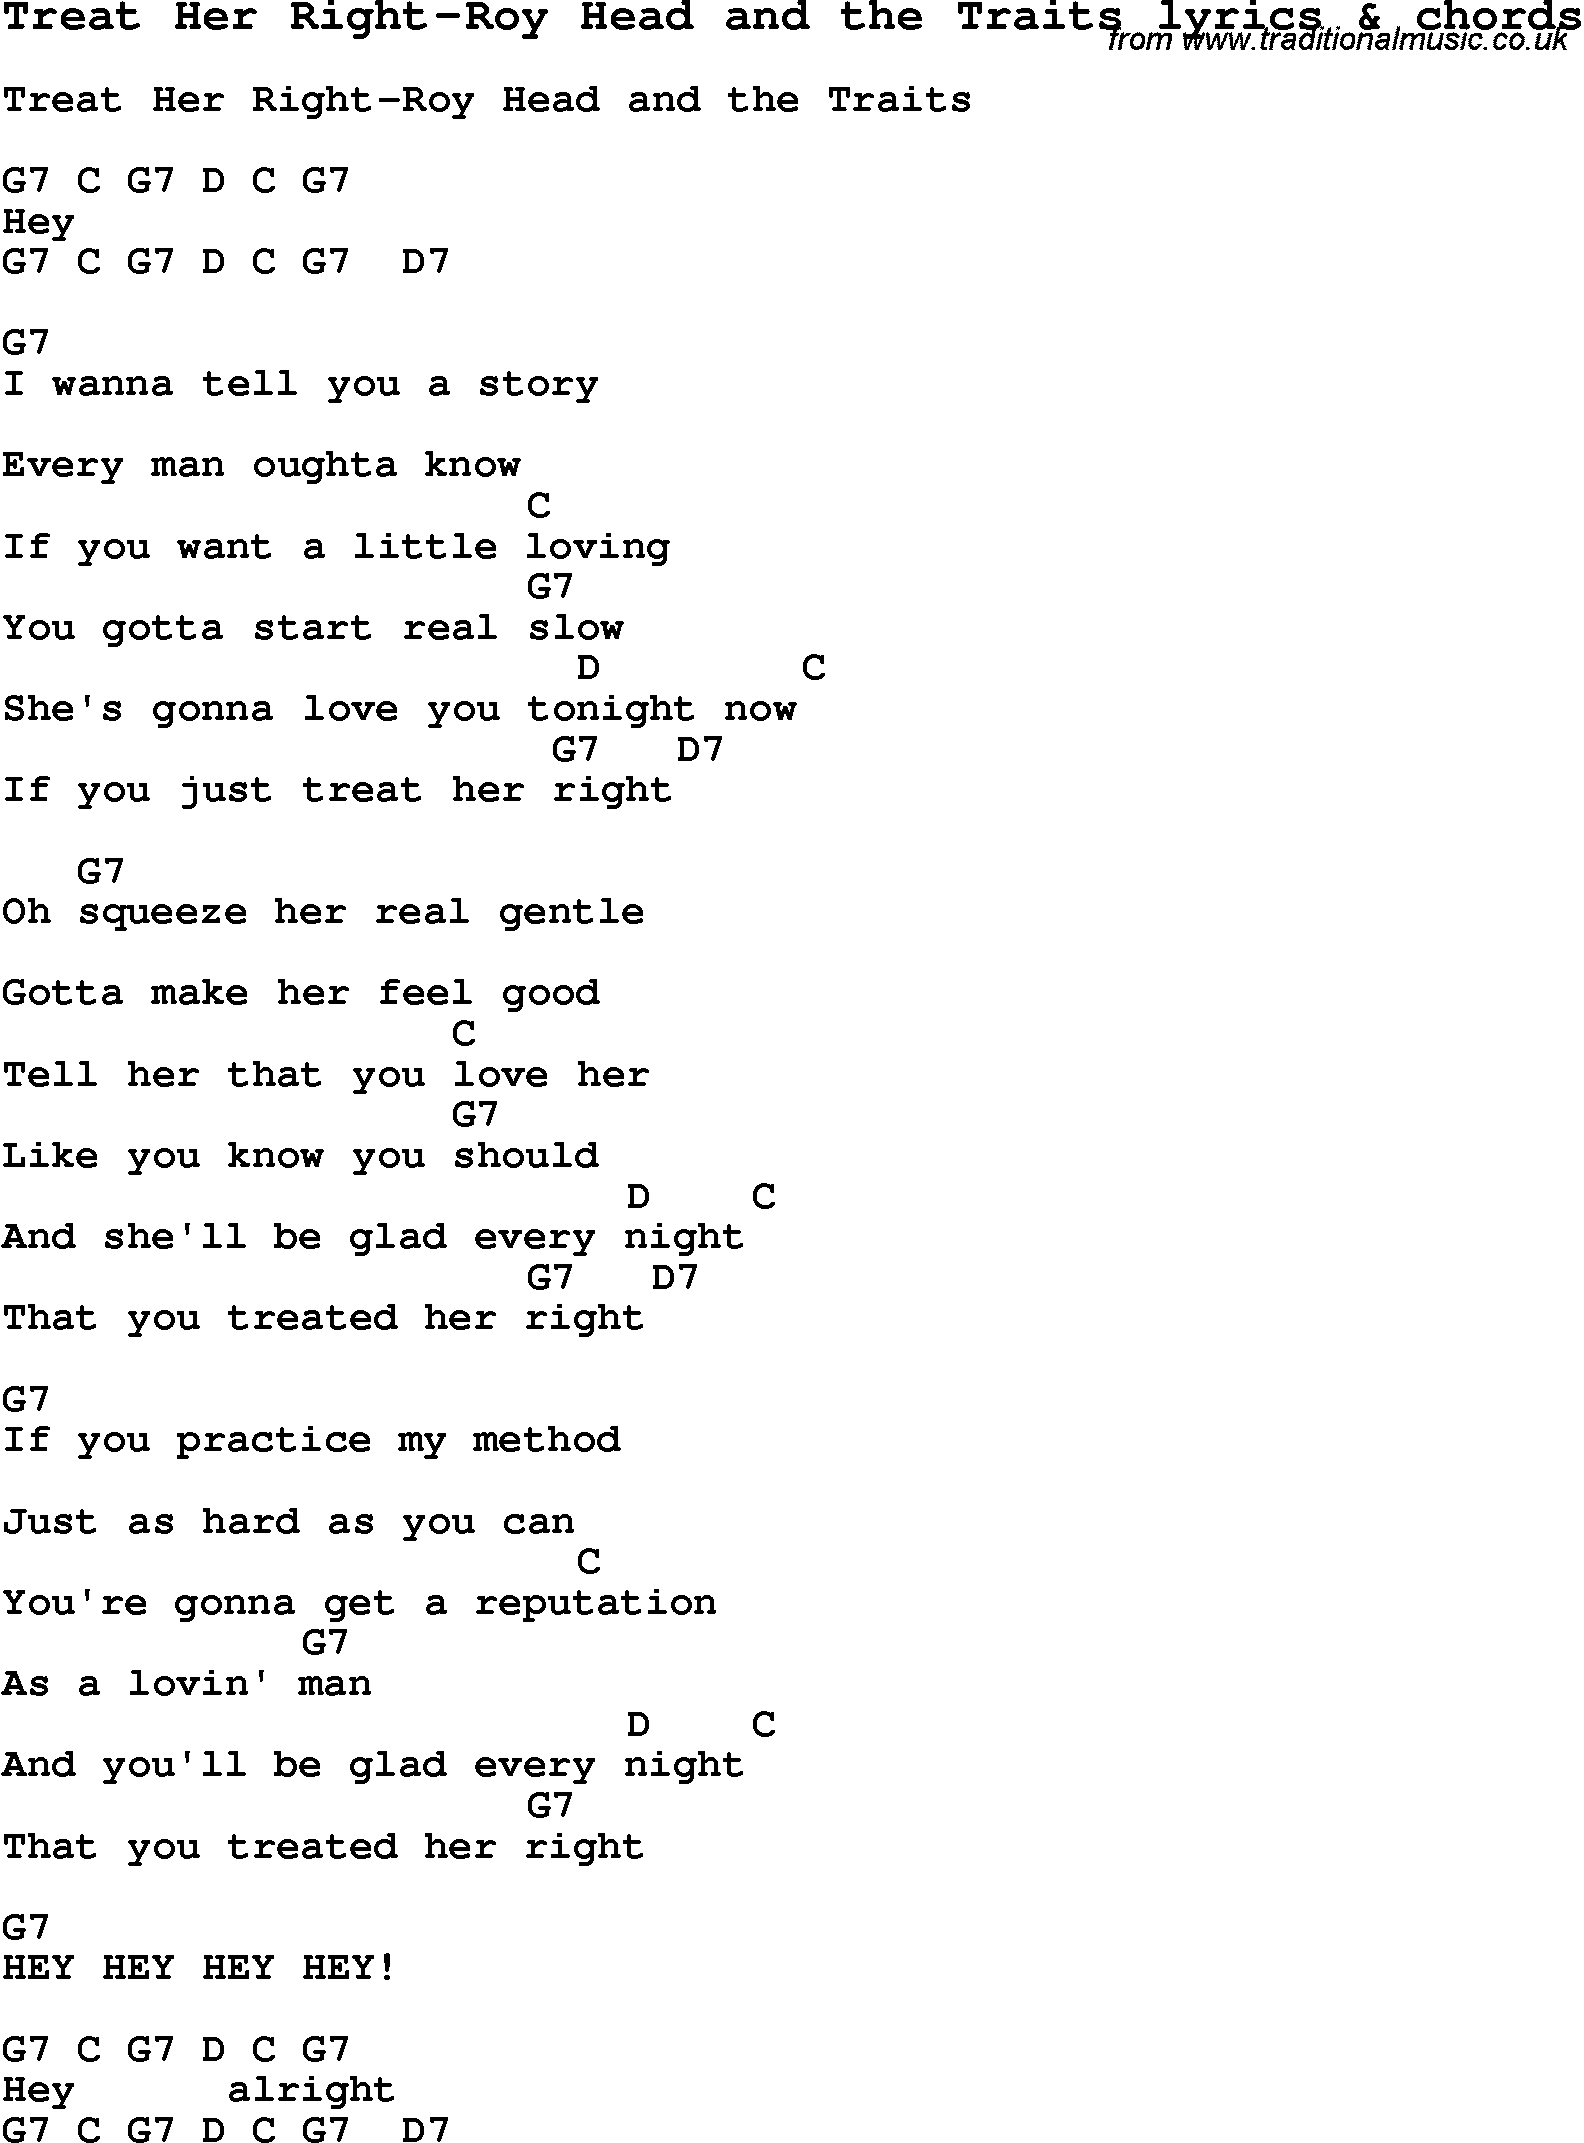 Love Song Lyrics for: Treat Her Right-Roy Head and the Traits with chords for Ukulele, Guitar Banjo etc.